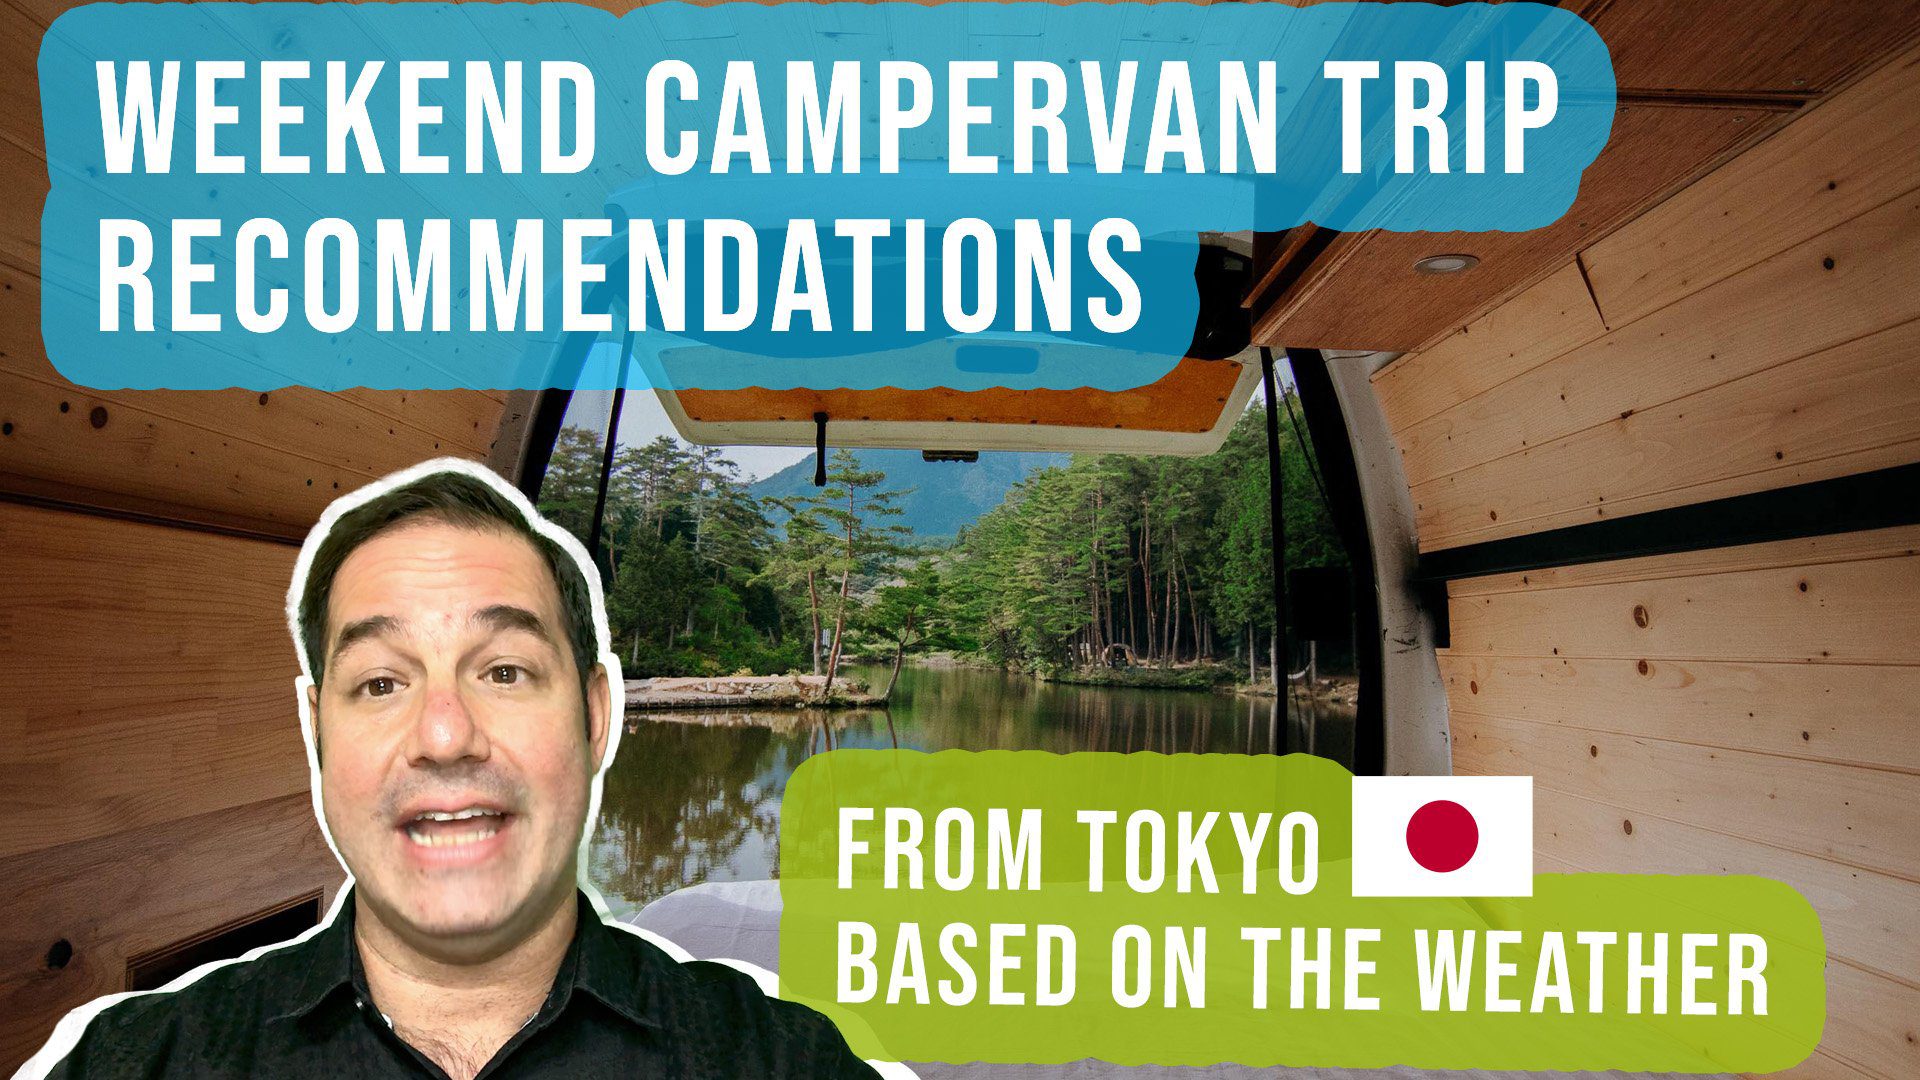 You are currently viewing Campervan trip recommendations based on the upcoming weekend weather